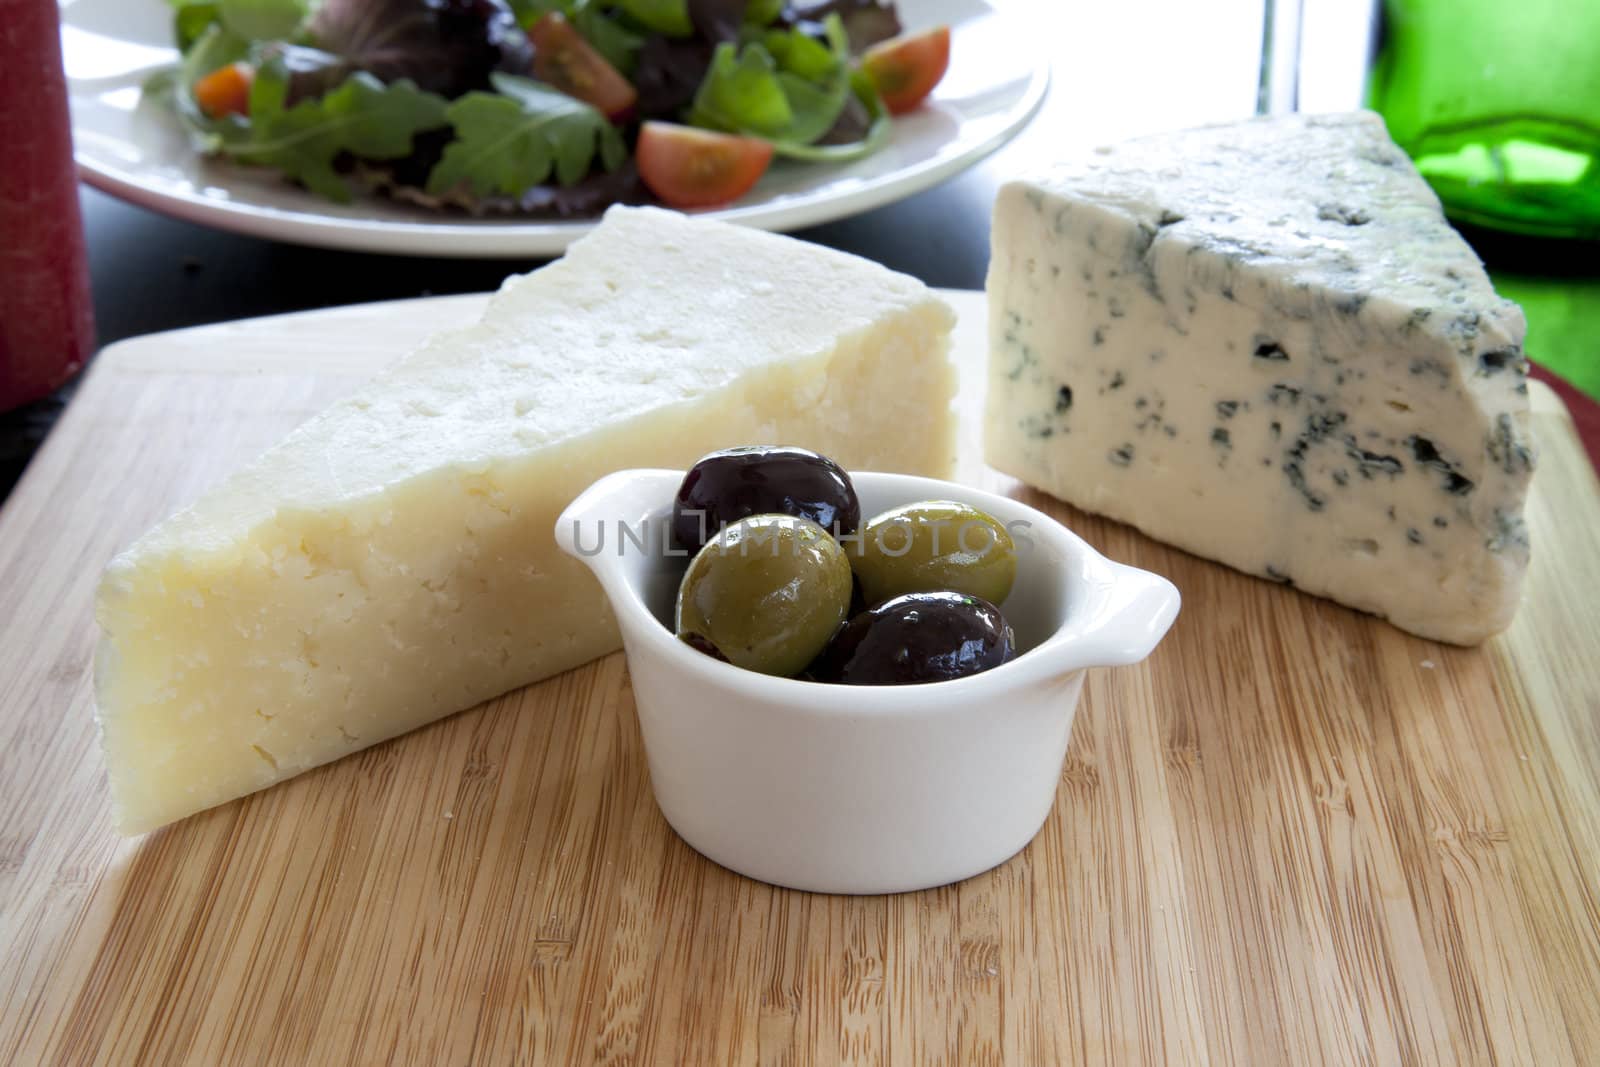 Parmesan and blue cheeses on cutting board with green and black olives.